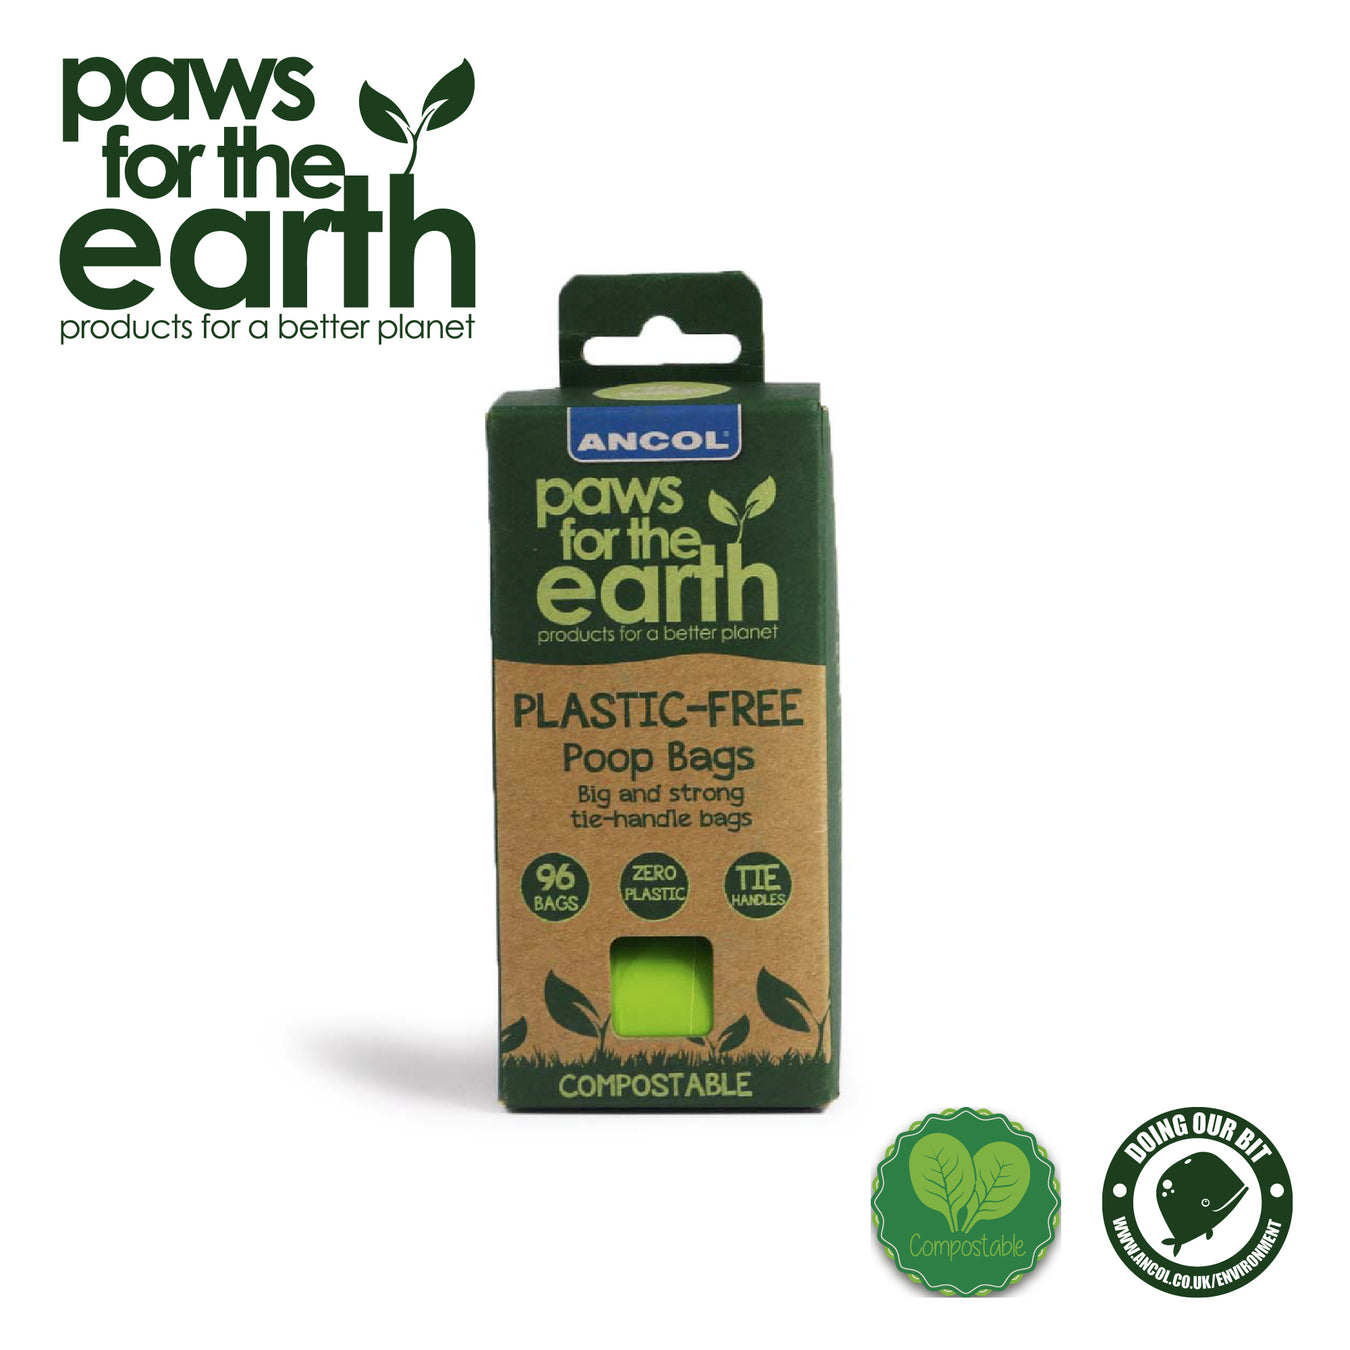 Eco friendly products for pets